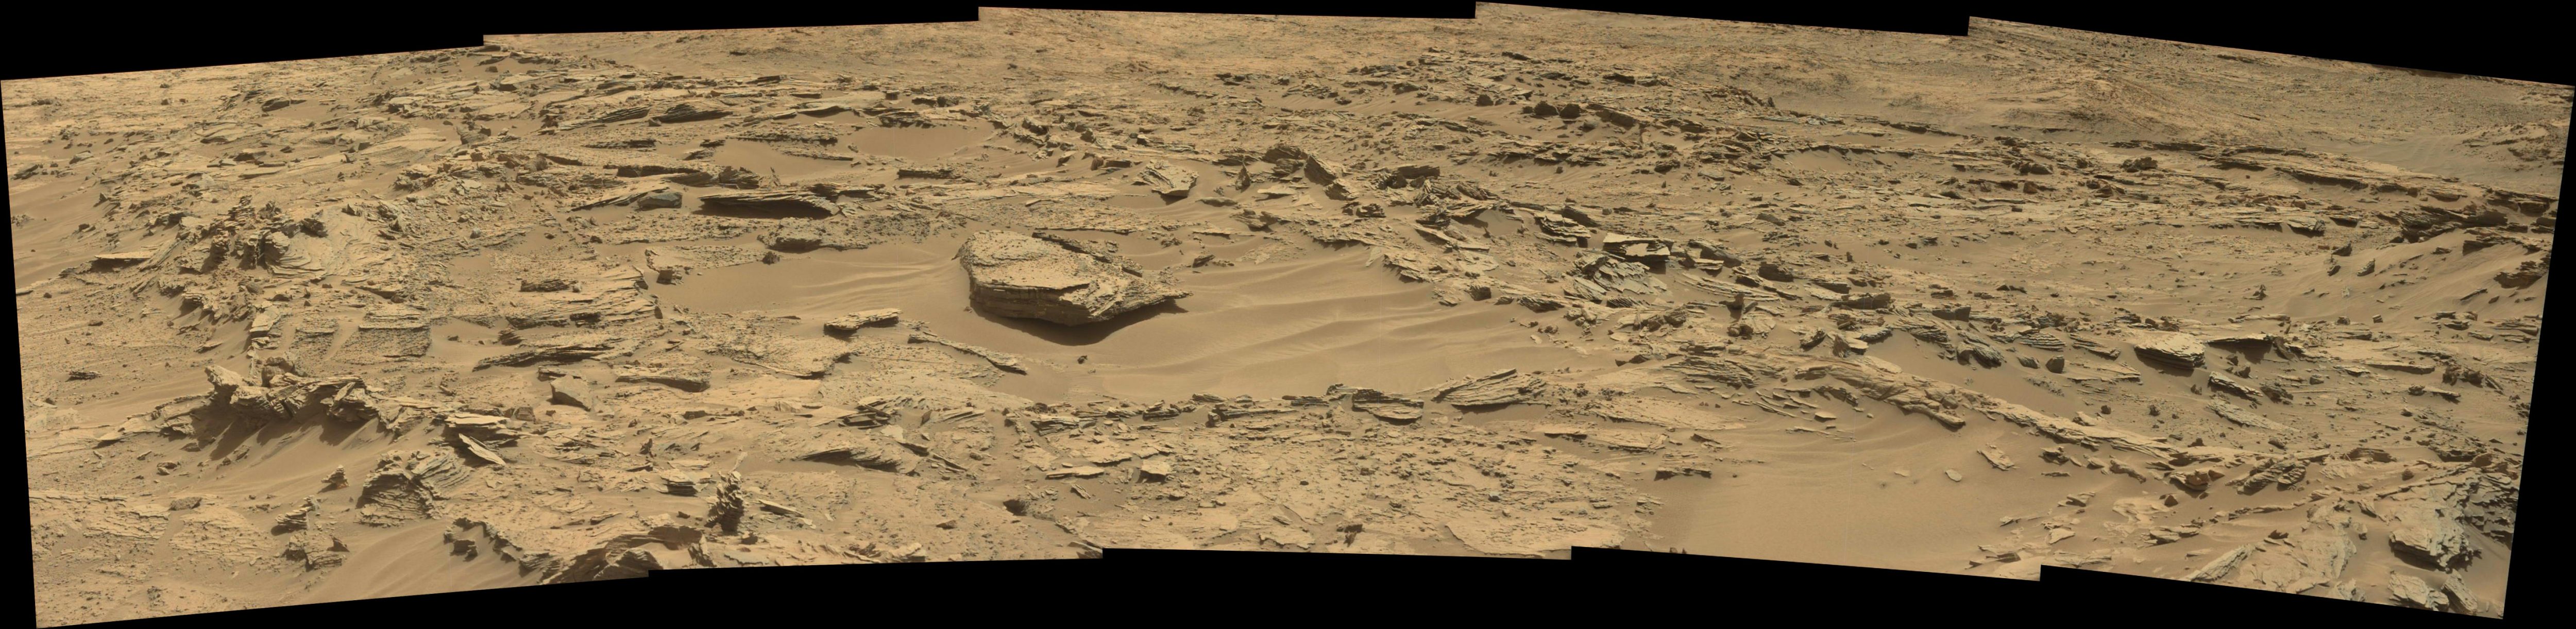 panoramic curiosity rover view 2 - sol 1346 - was life on mars